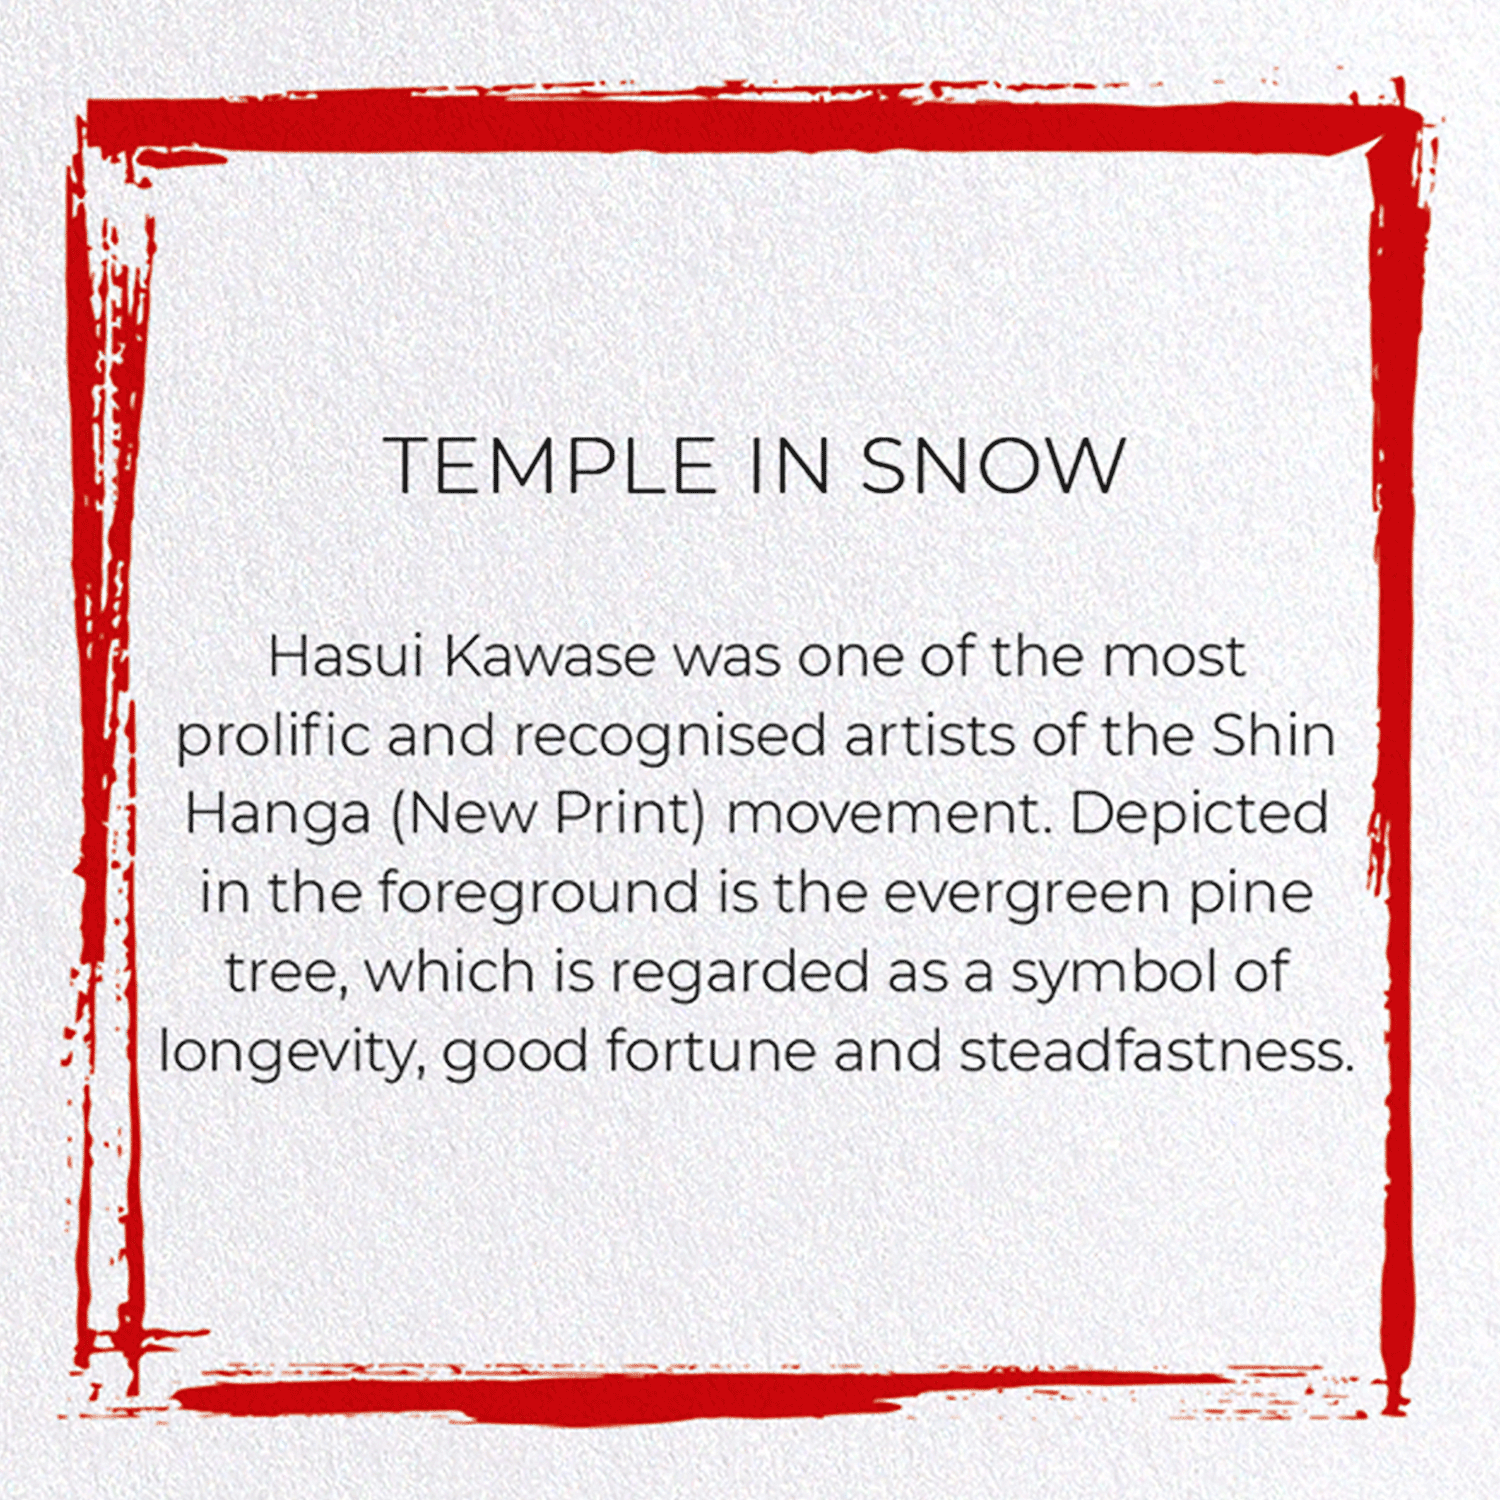 TEMPLE IN SNOW: Japanese Greeting Card